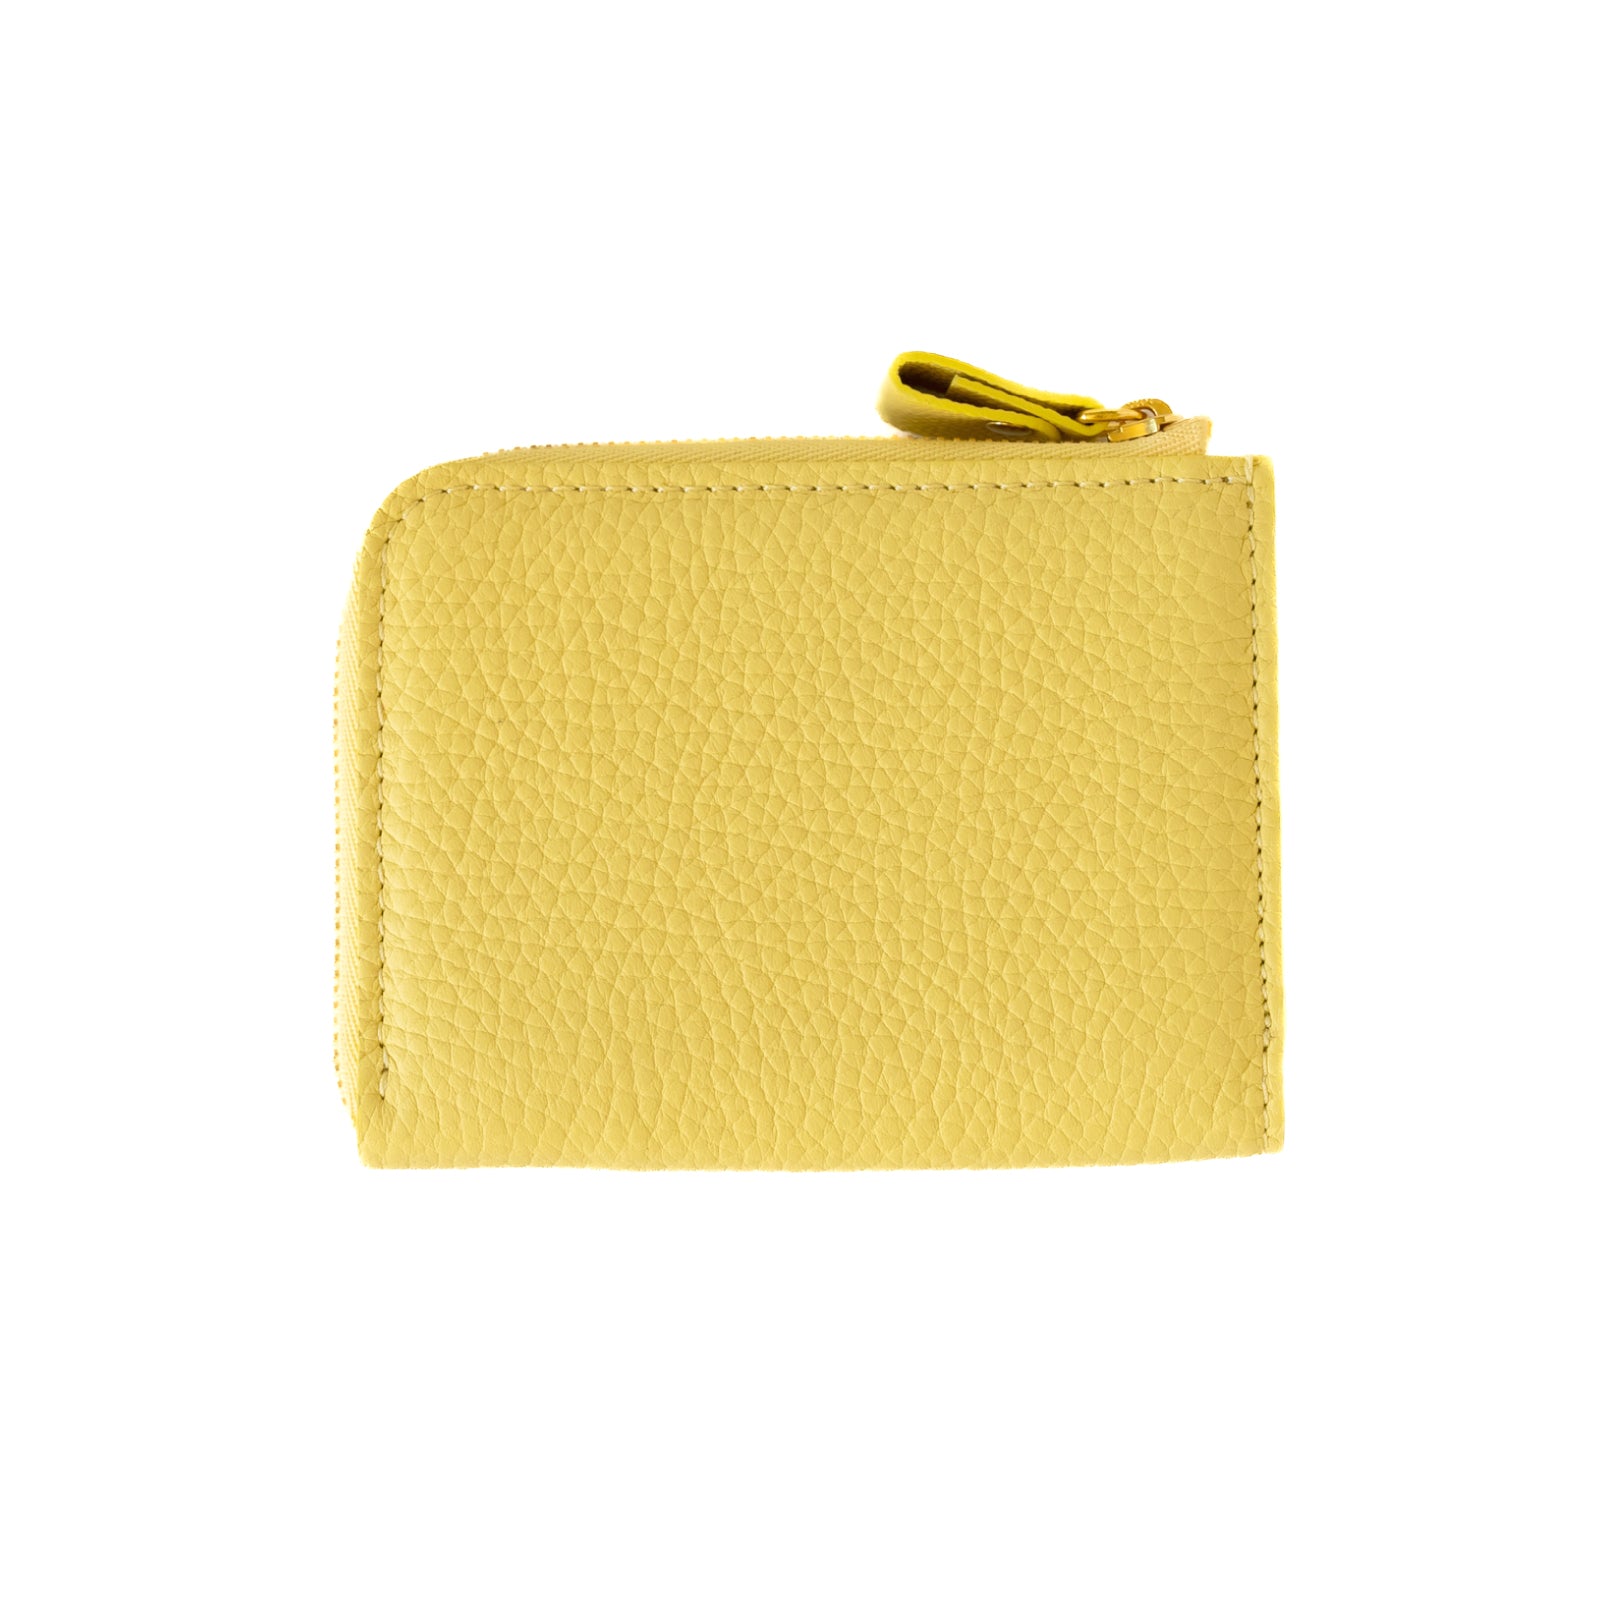 Minimum wallet with L shaped fastener / Taurillon Clemence